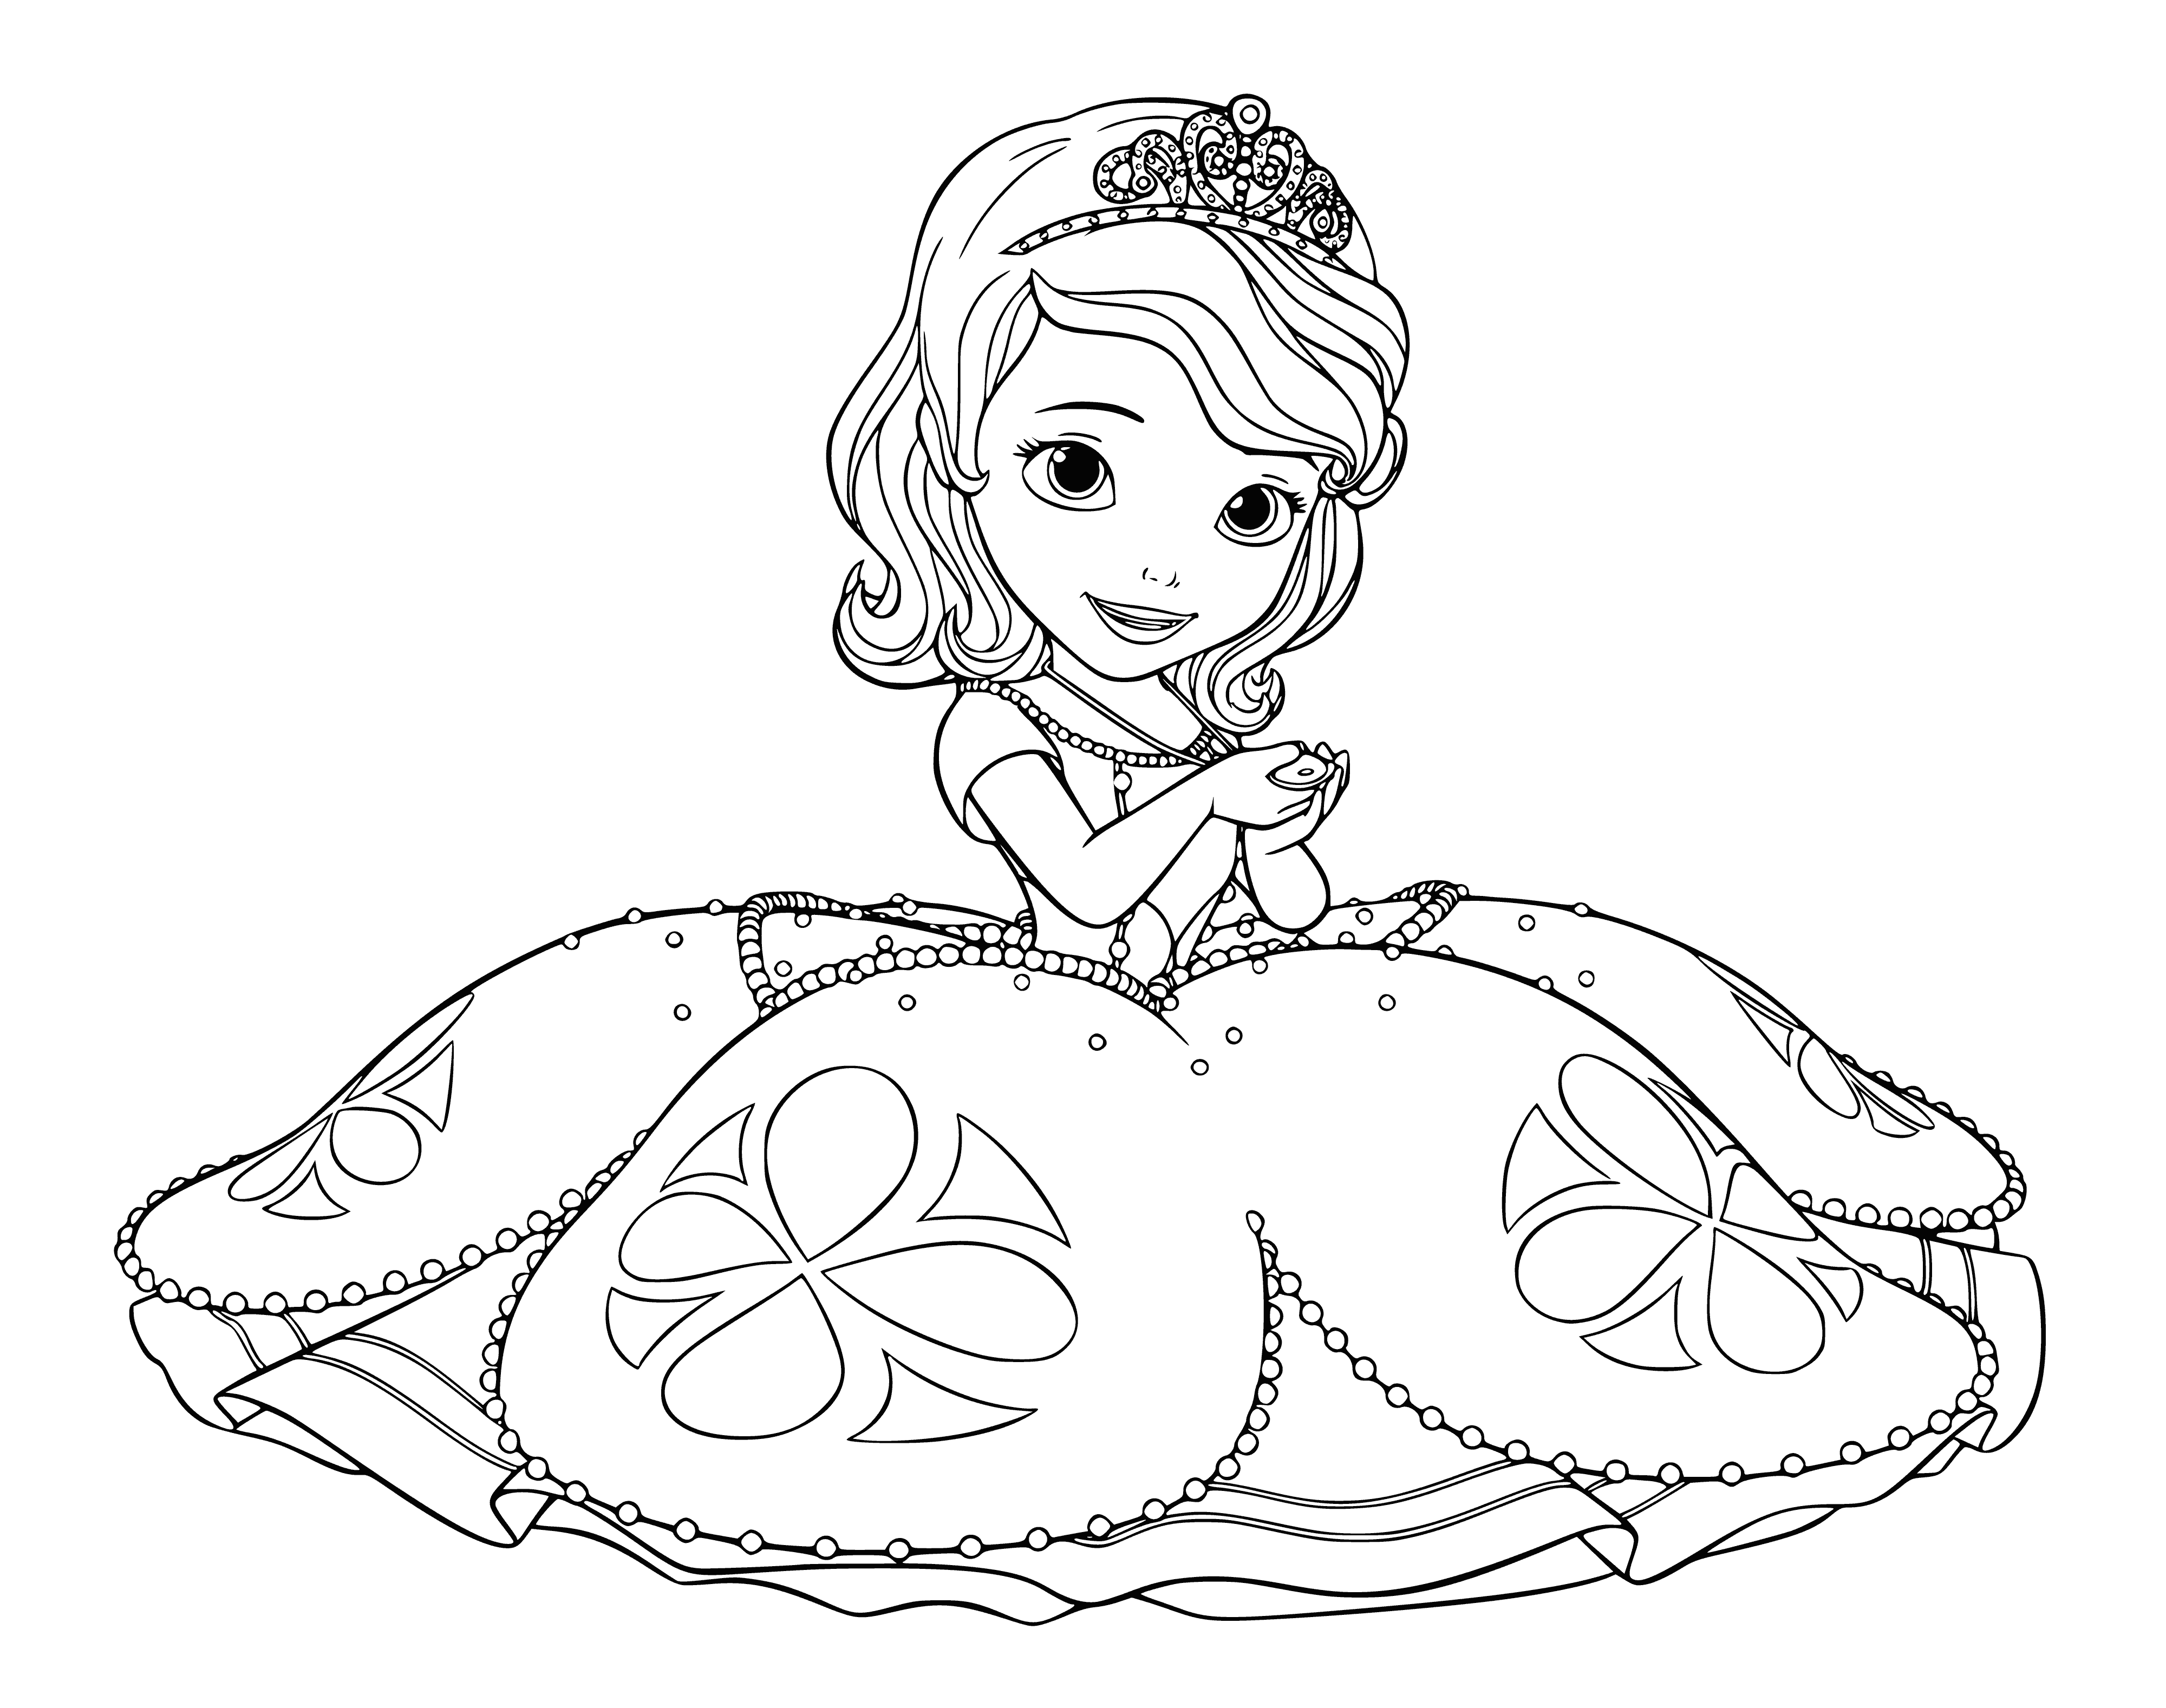 coloring page: Sofia colors paged with her amulet, a thin gold chain with a pink gemstone in the center. She looks happy.